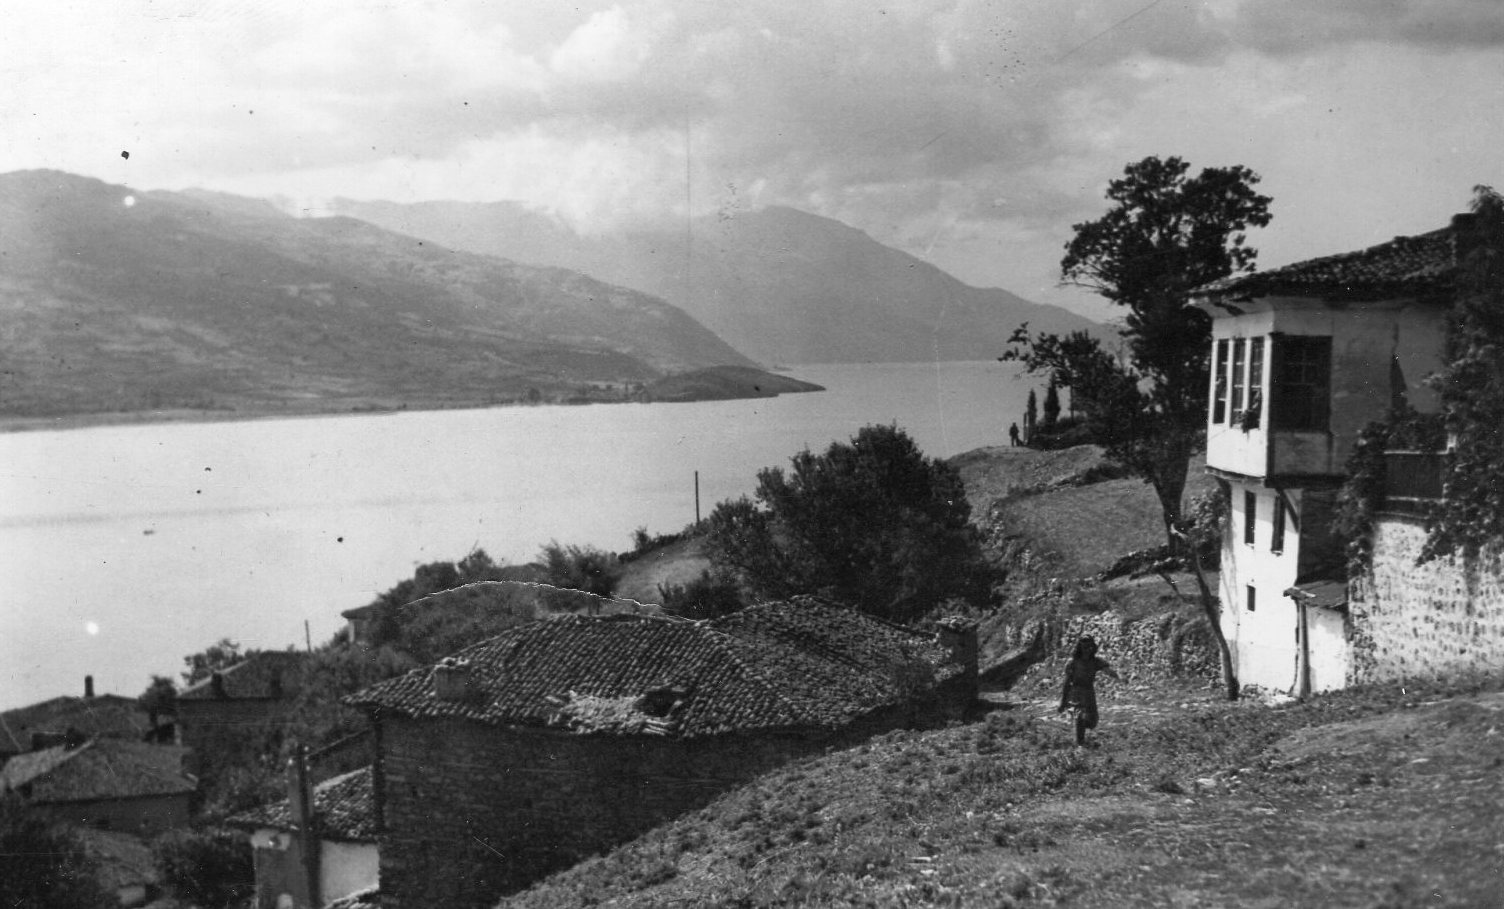 Ohrid, razglednica, 1942 - Postcard of Ohrid from 1942





This media file is produced by Wikipedian in Residence in Category:Wikipedian in Residence at DARM in 2016.